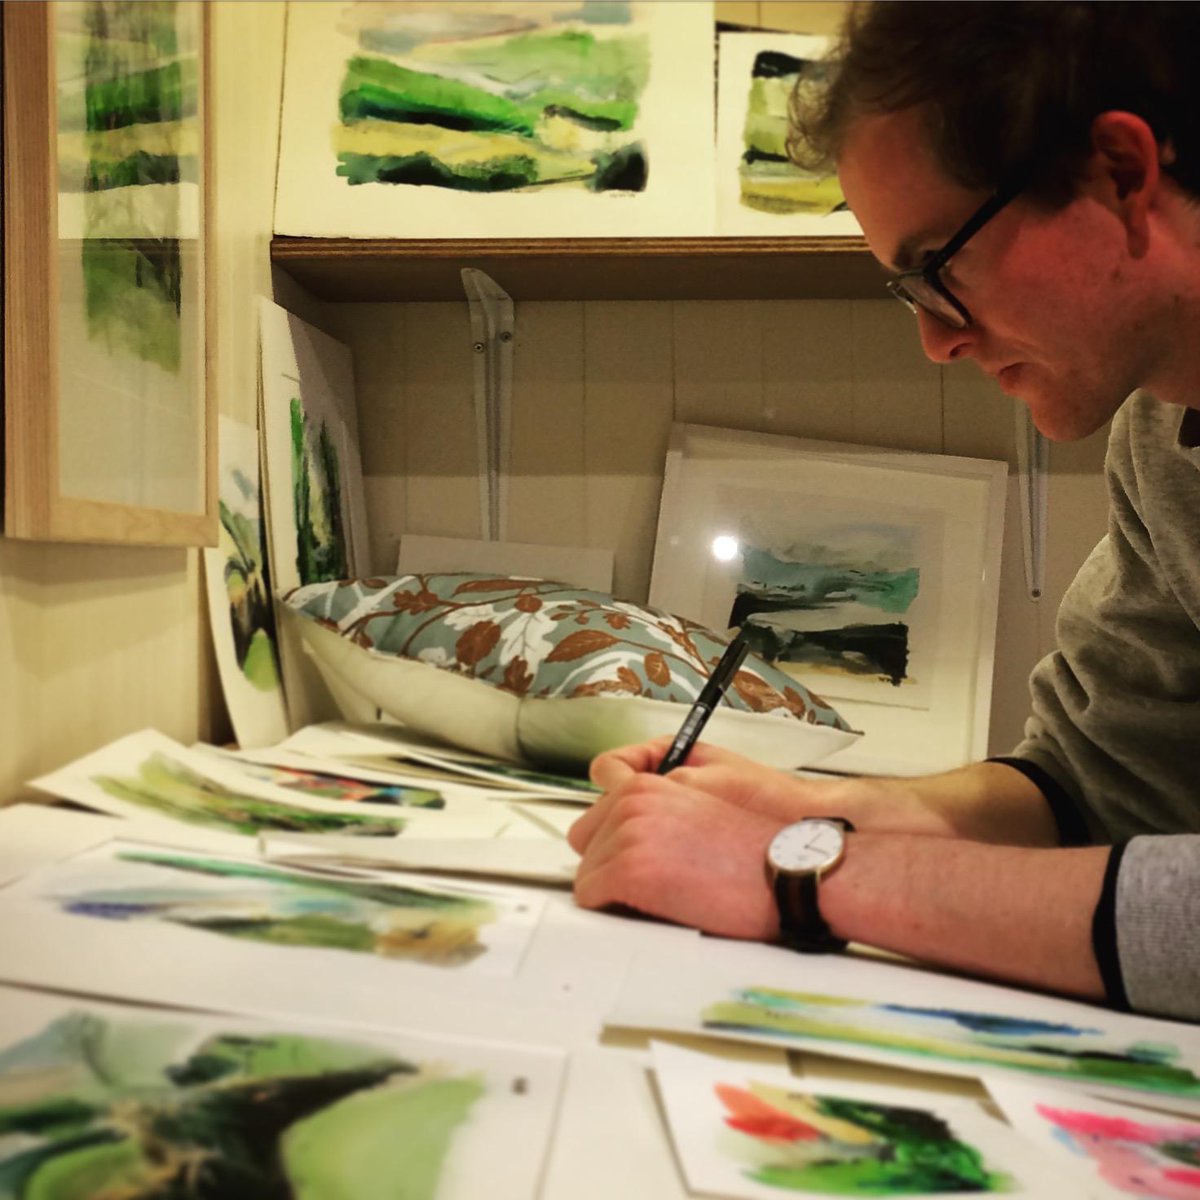 Finishing touches to some of my artwork... only 3 days until #nyos15 #northyorkshireopenstudios #yorkshiredales #art